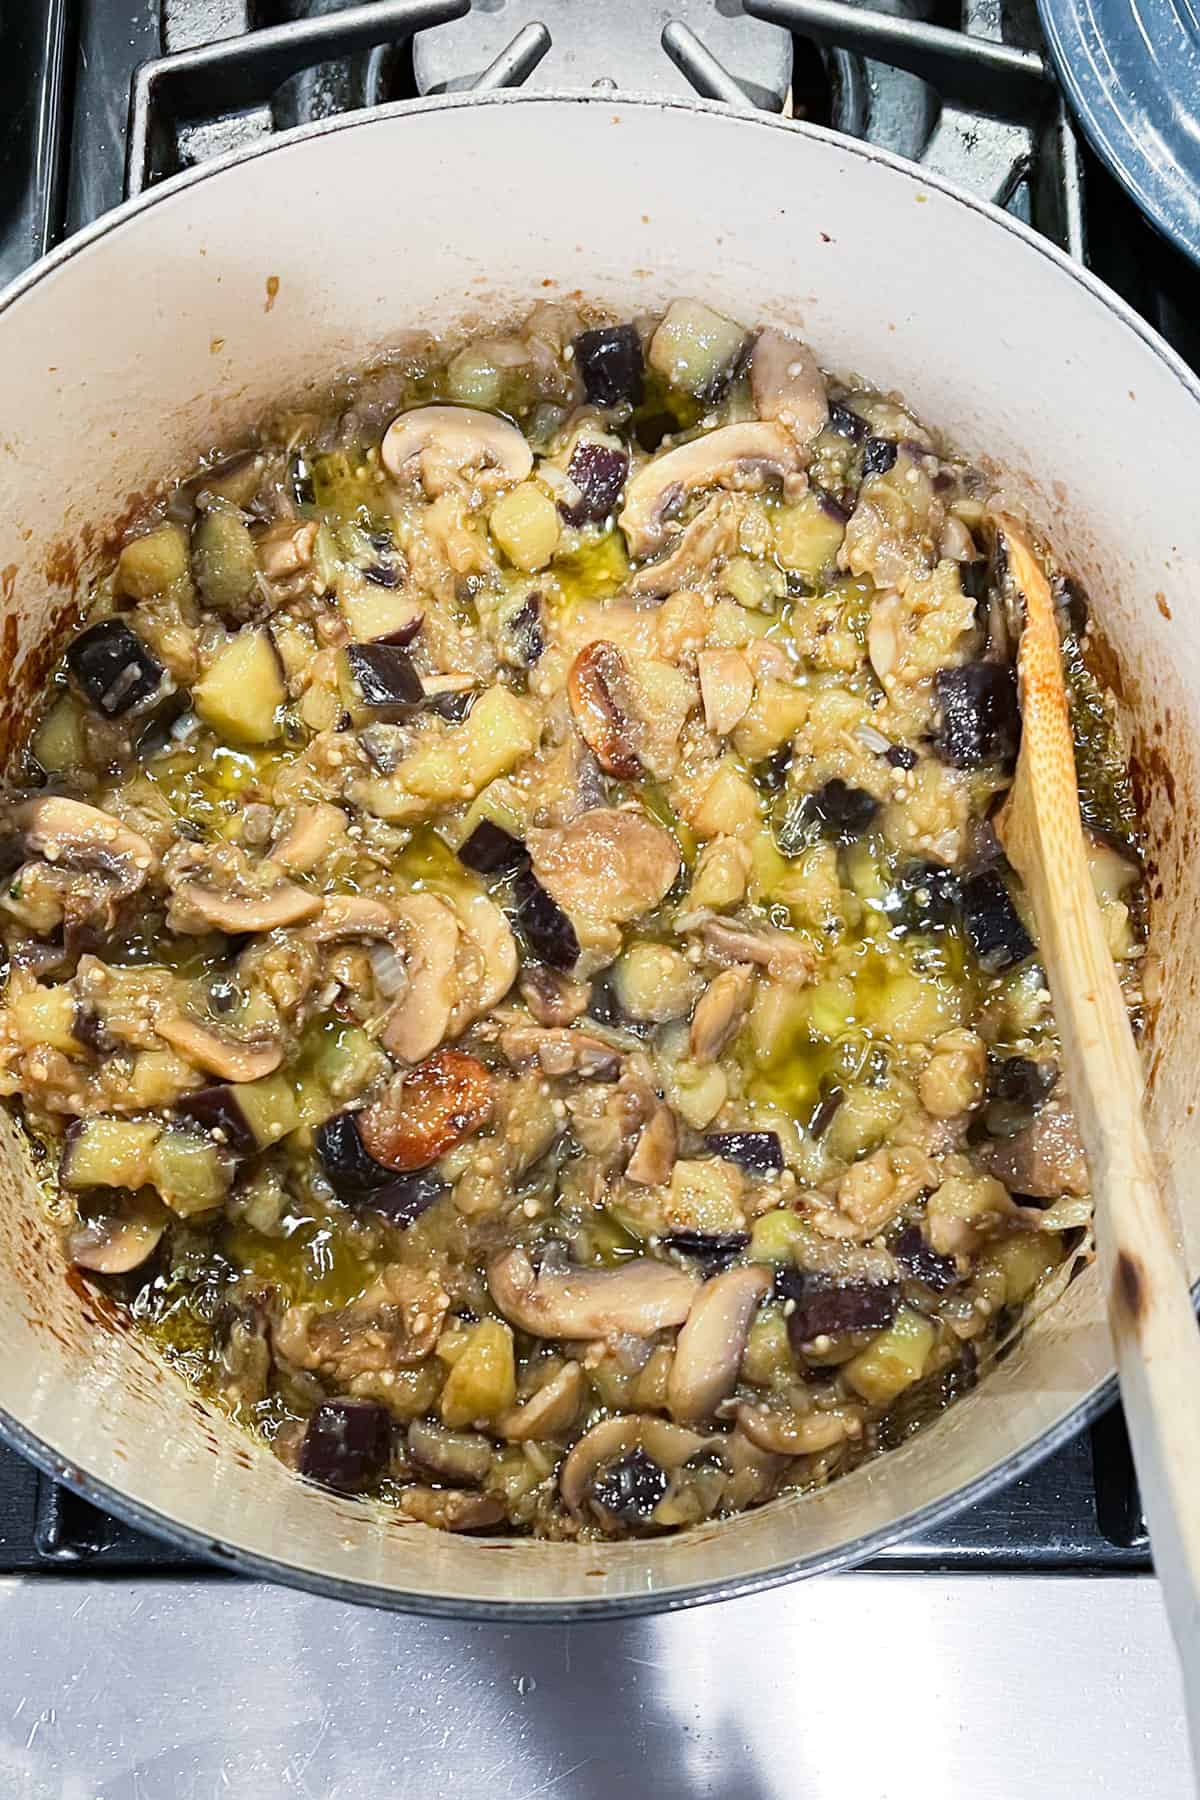 Sautéed mushrooms, onions and eggplant in a dutch oven